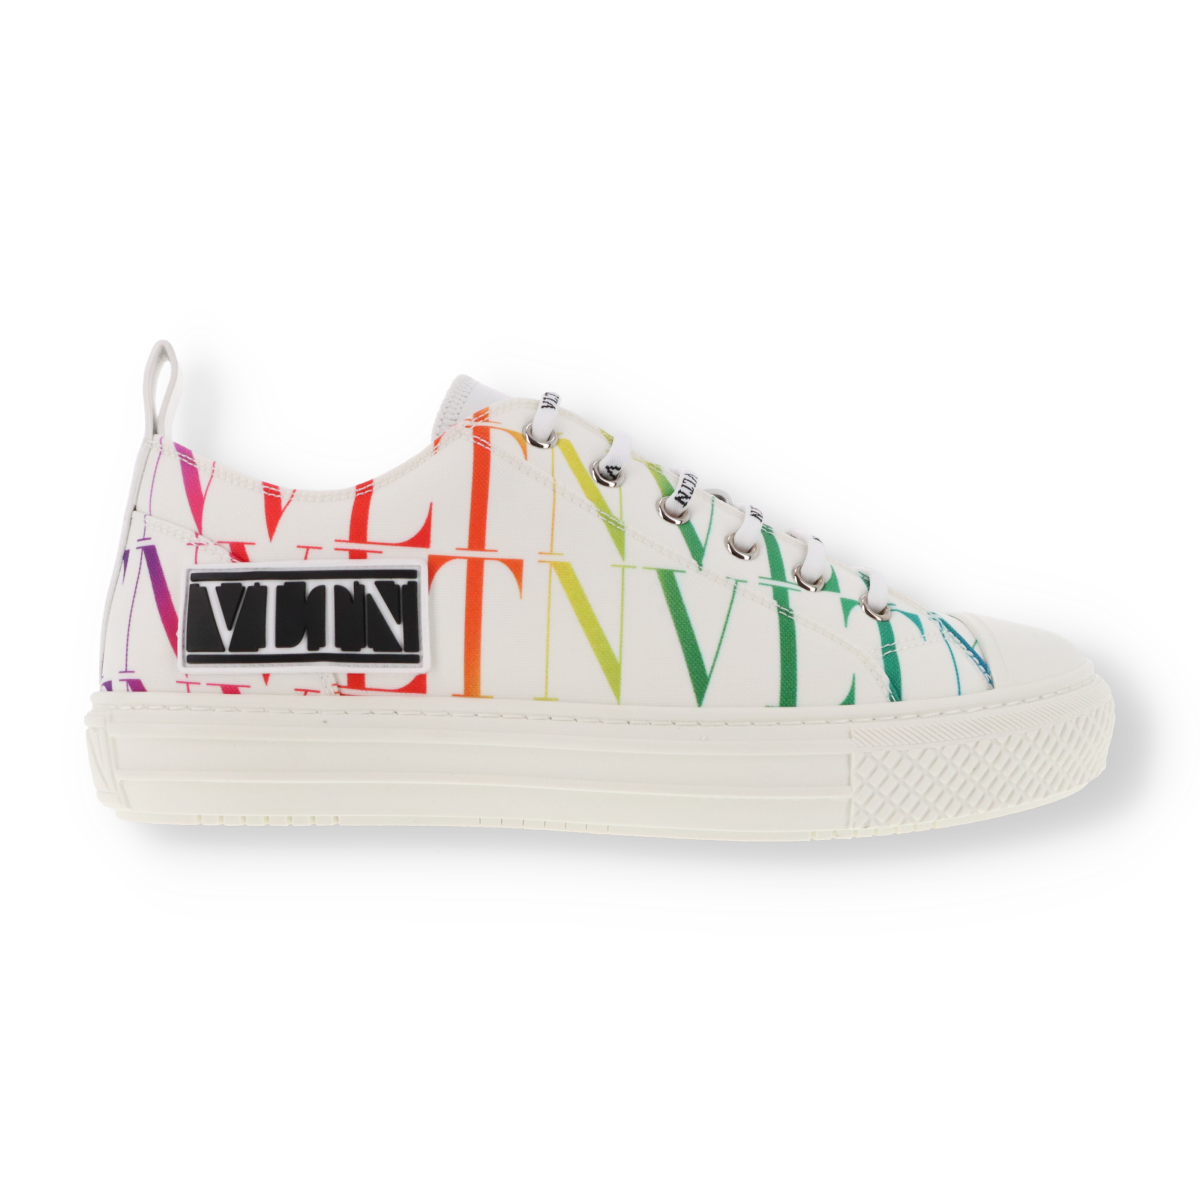 Valentino VLTN Times Giggies Sneakers